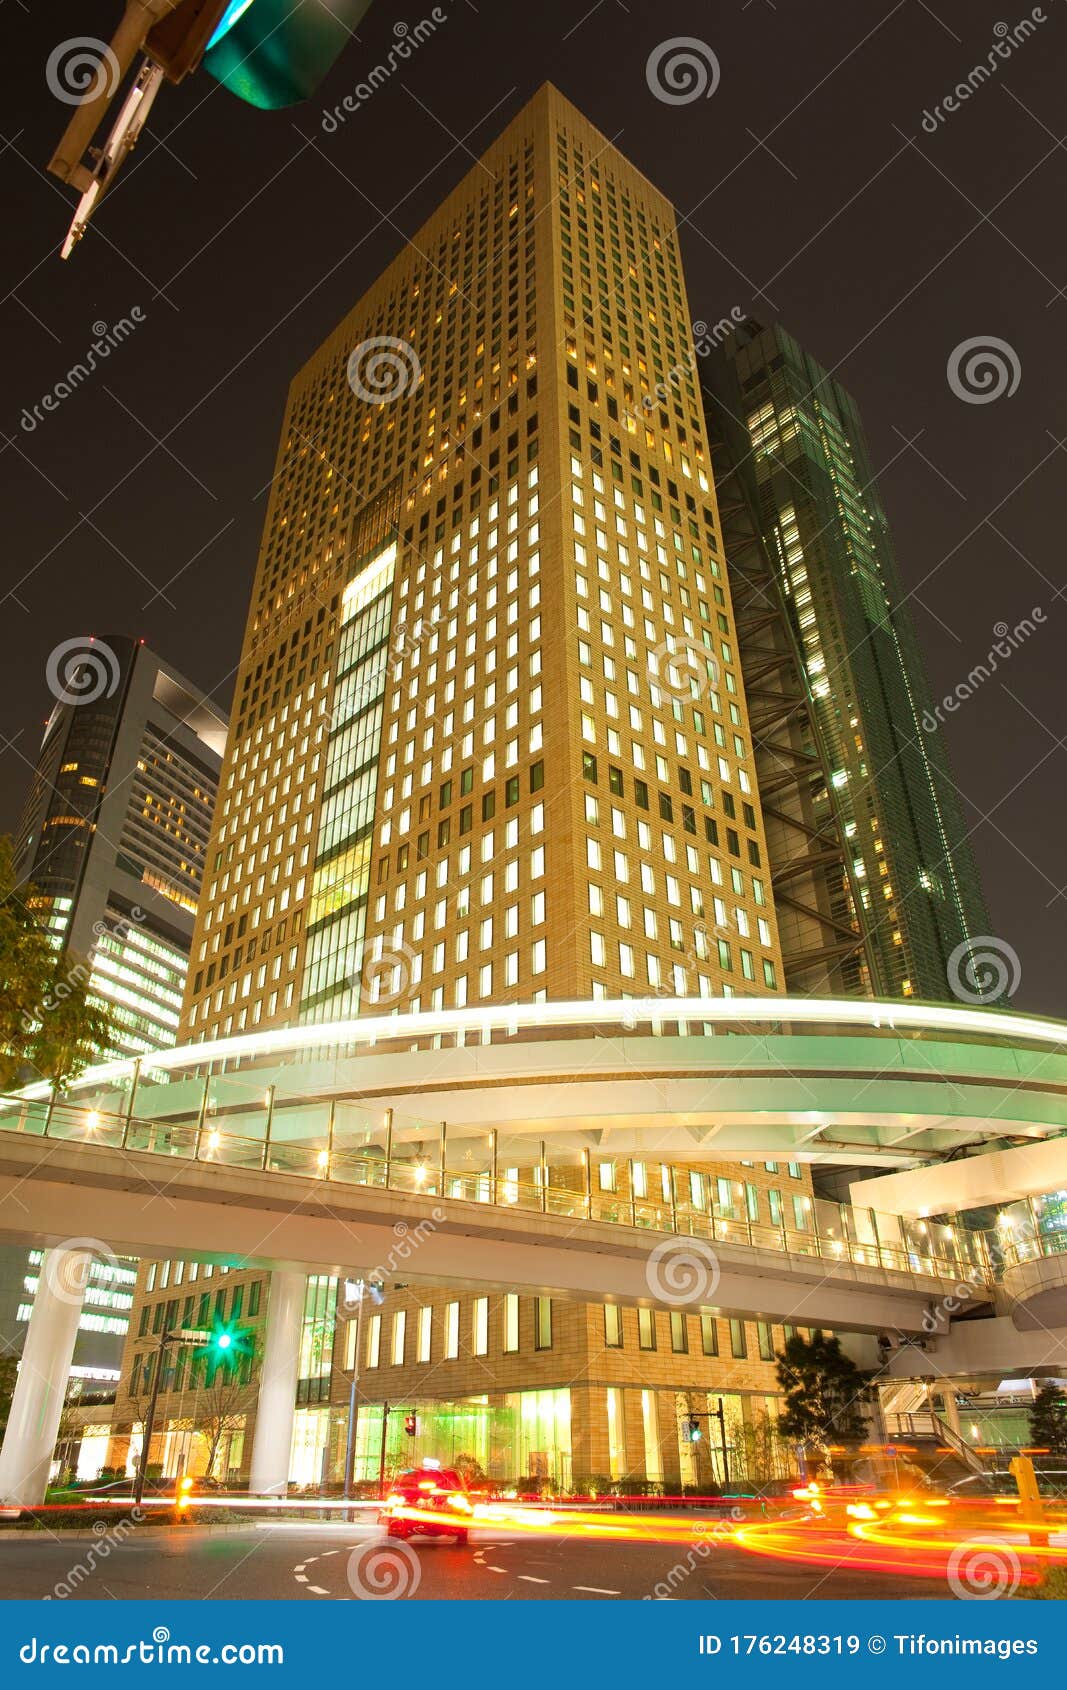 skyline of skyscrapers at shiodome area in shimbashi district, tokyo